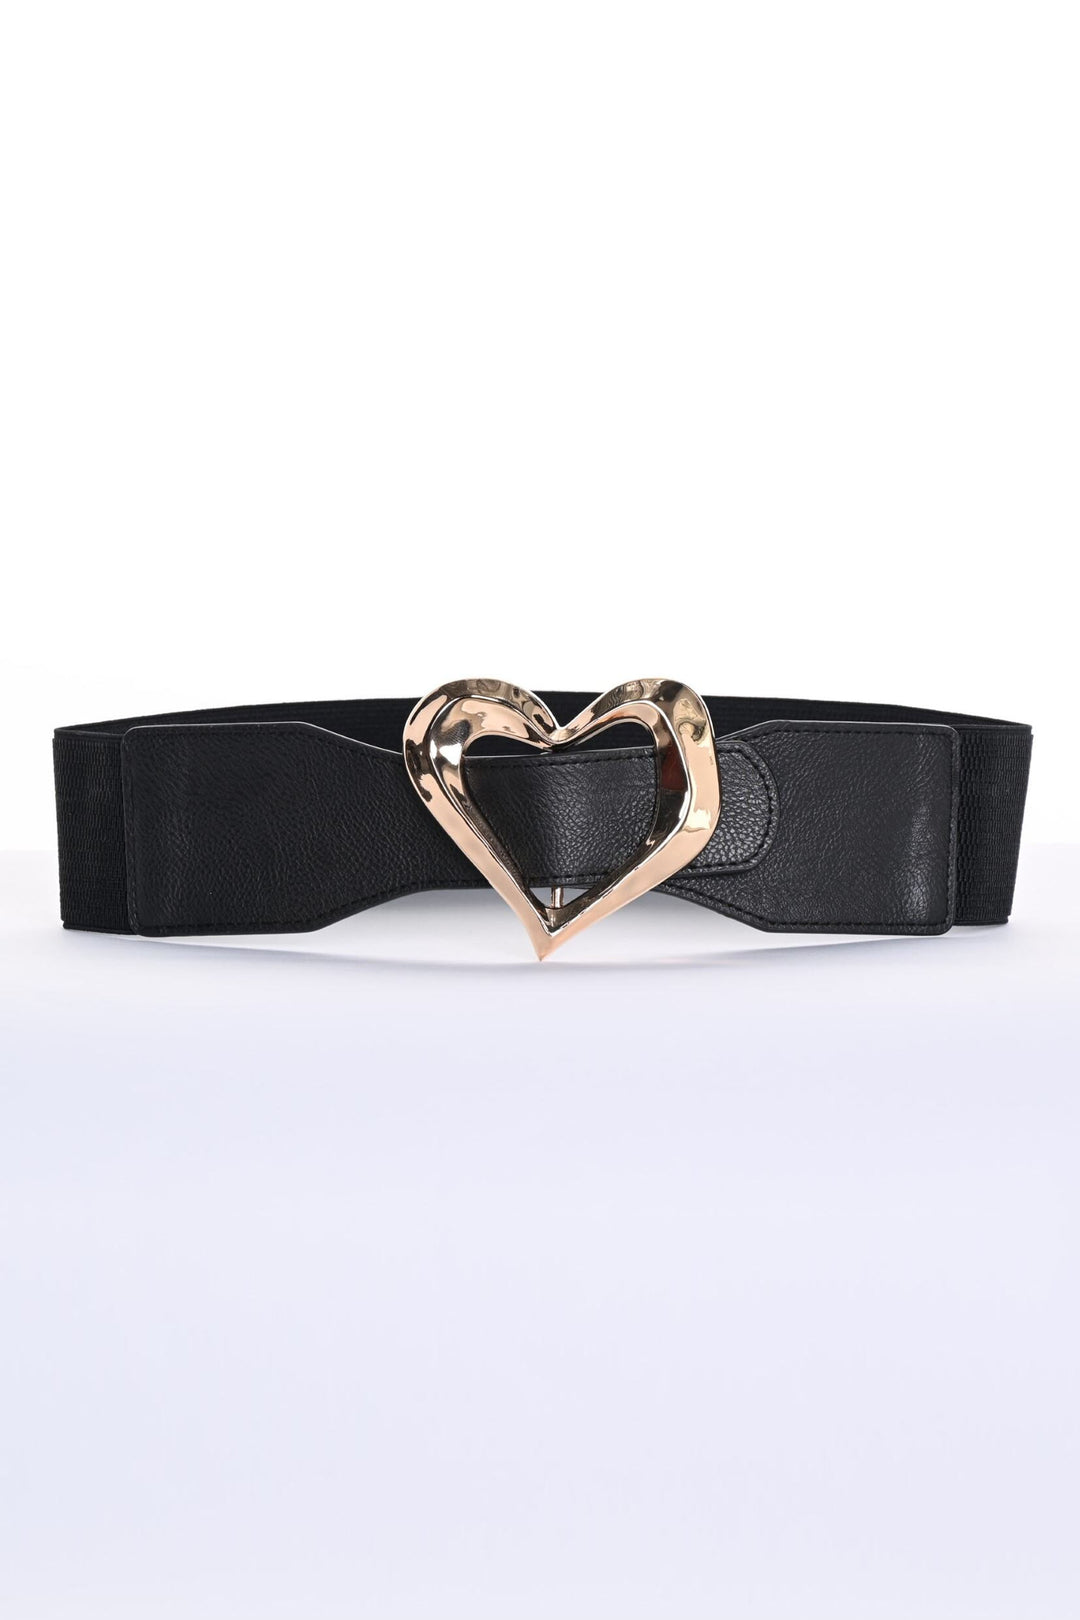 Frank Lyman Fall 2024 Its gold heart adds a touch of cuteness to any everyday look. Crafted with a flexible material, this belt is designed to provide a comfortable fit throughout the day.